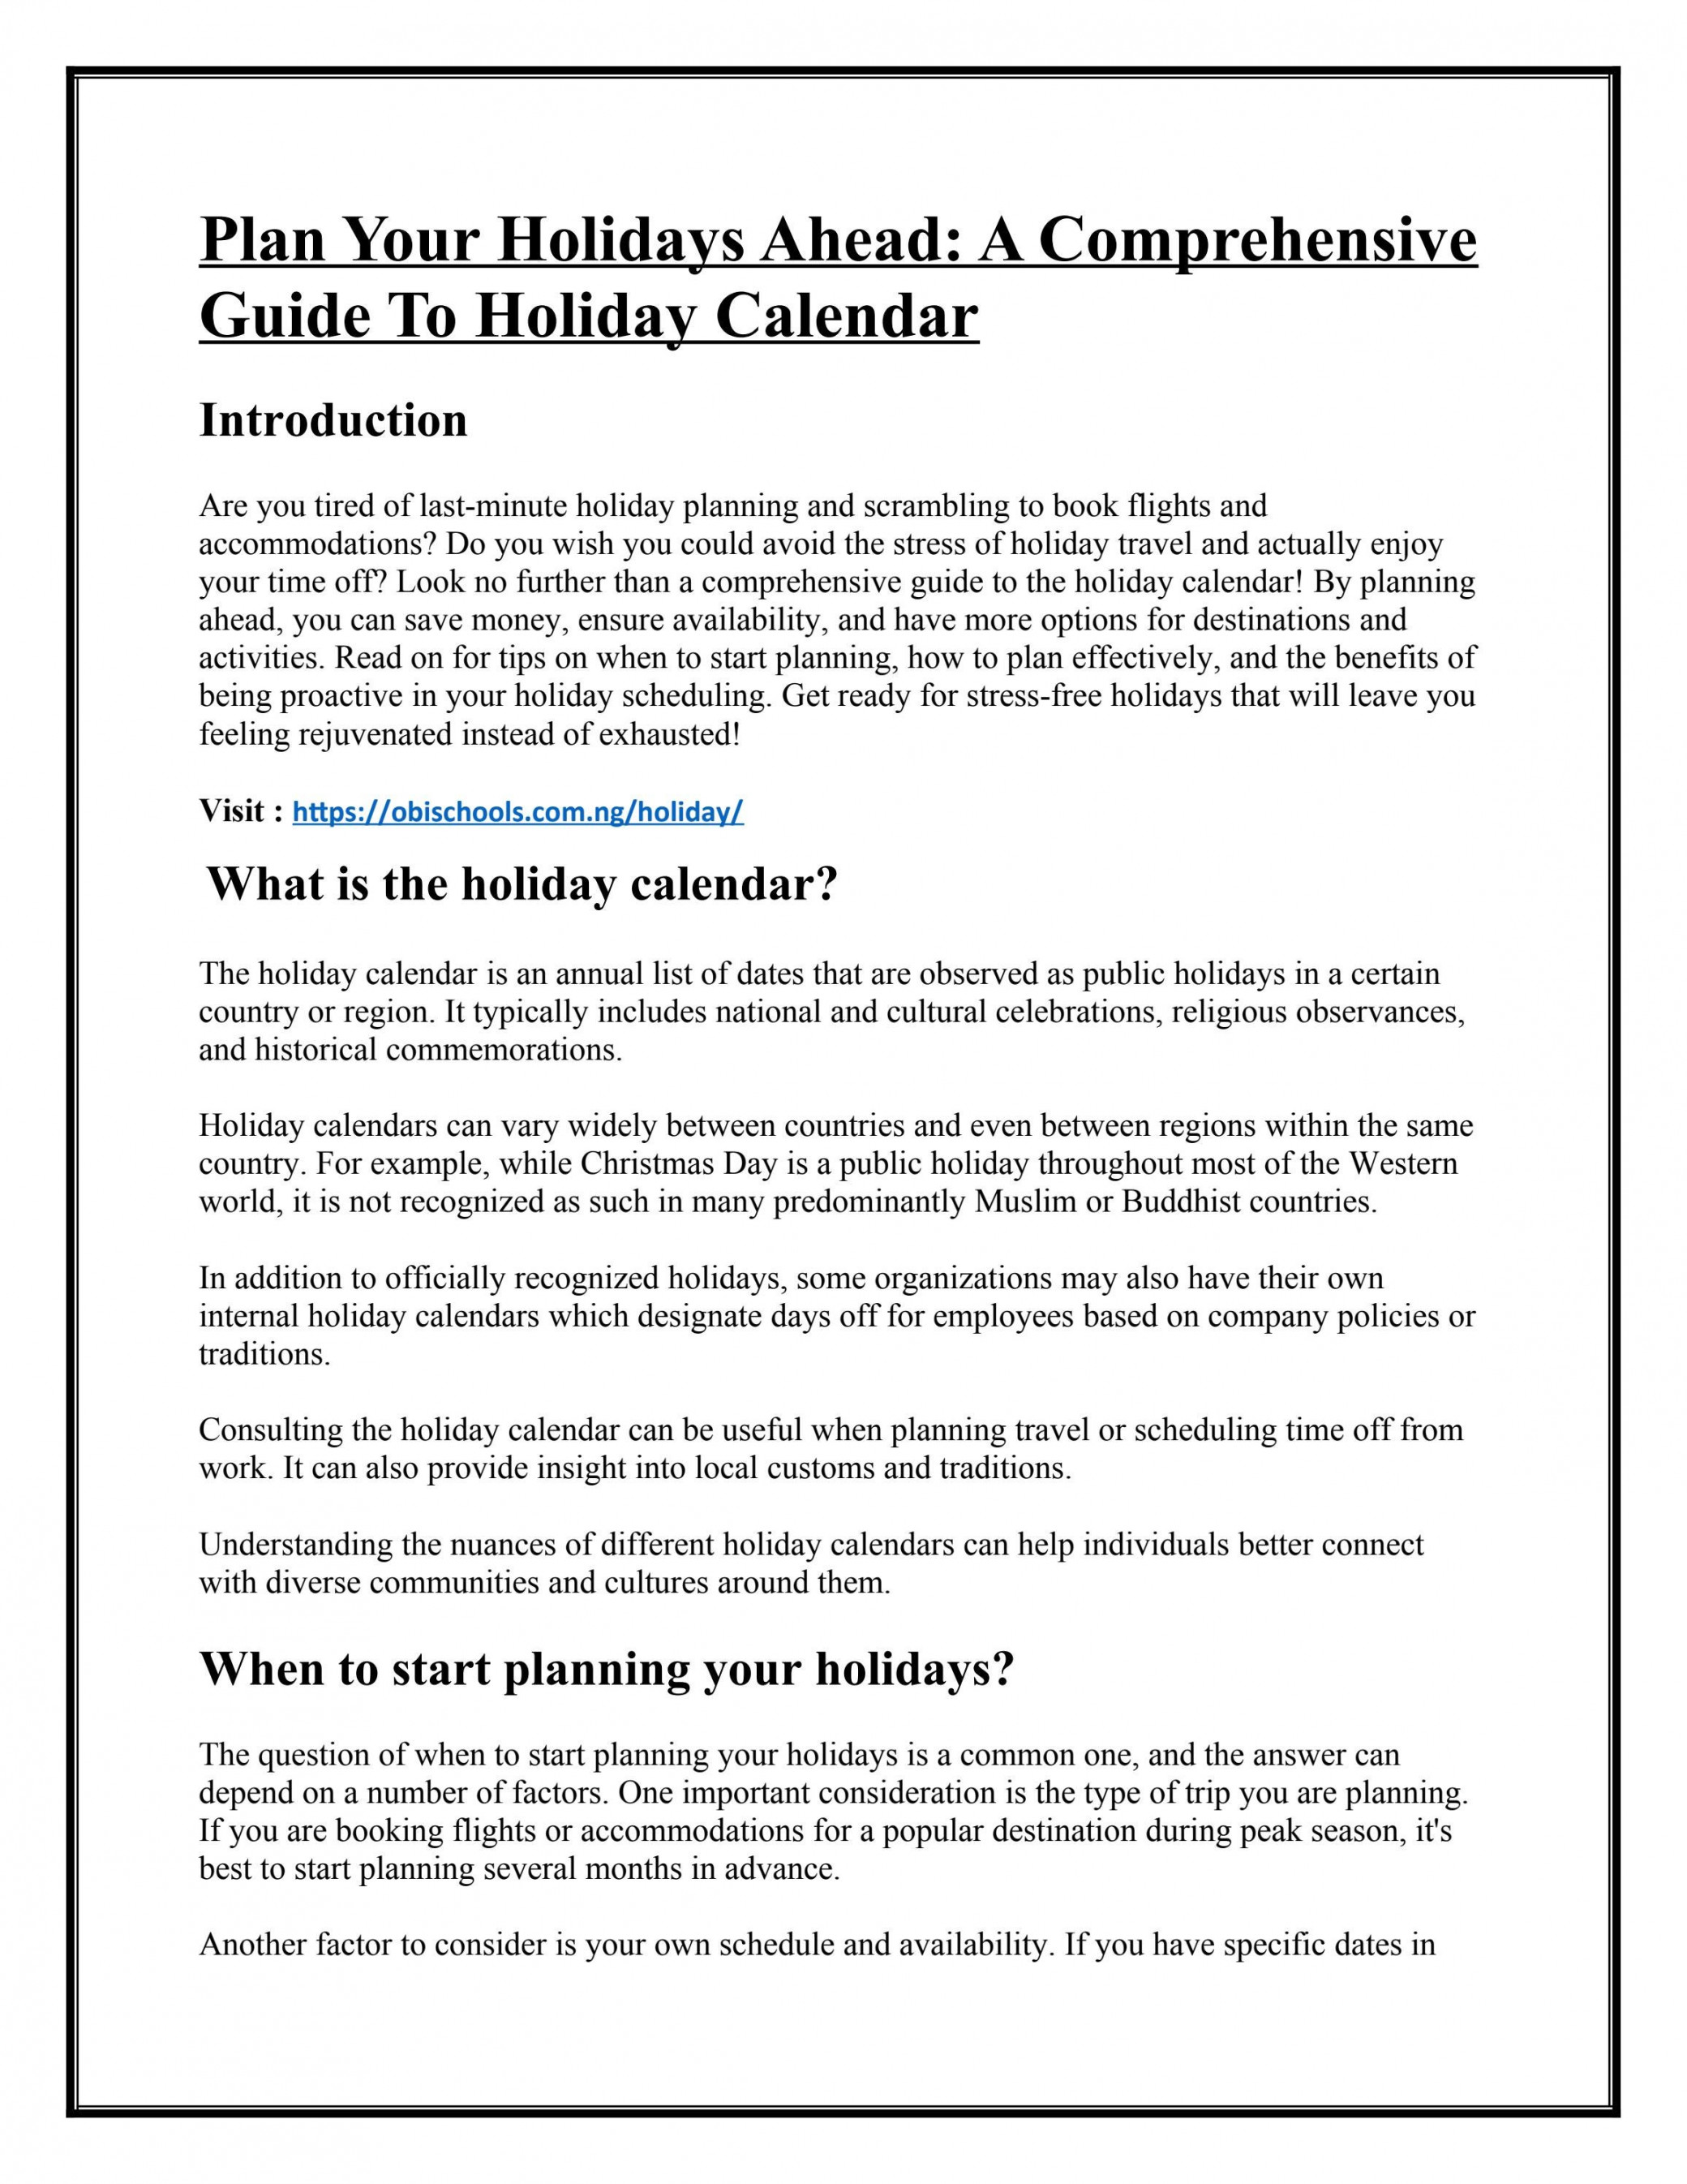 Plan Your Holidays Ahead A Comprehensive Guide to Holiday